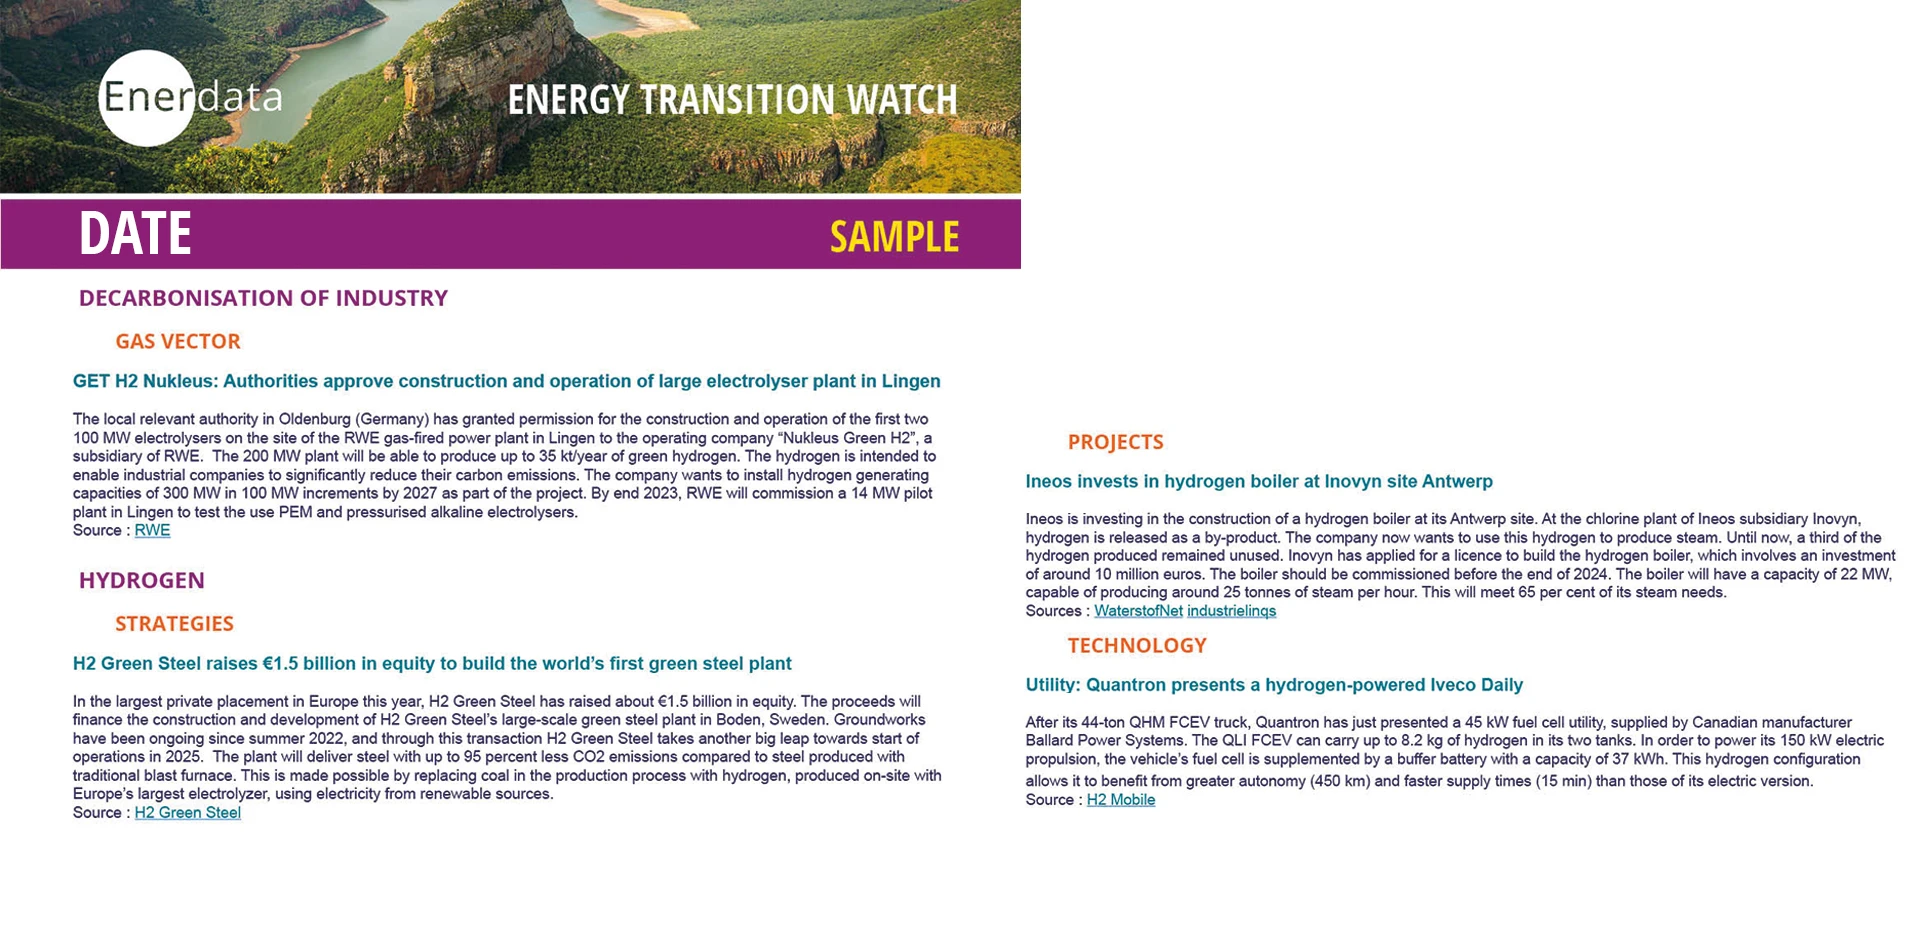 Energy Transition Watch sample